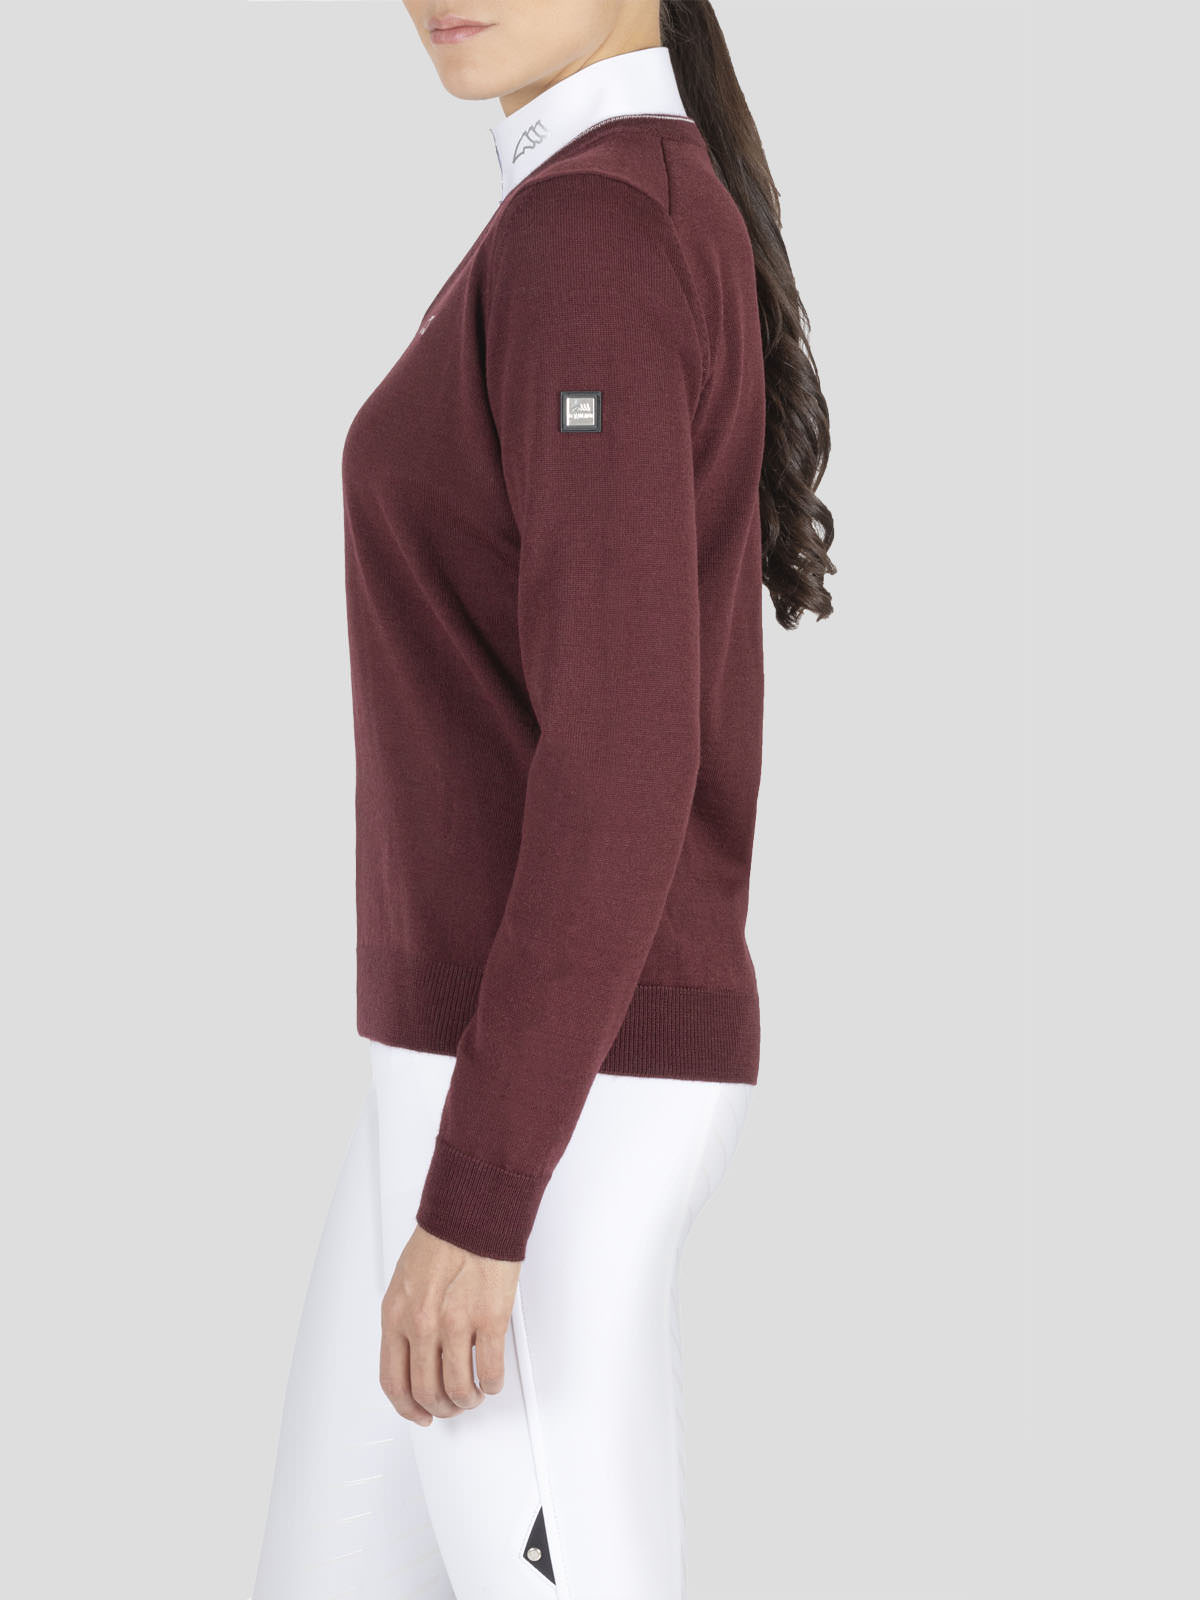 CONCEC WOMEN'S V NECK PULLOVER SWEATER - Equiline America